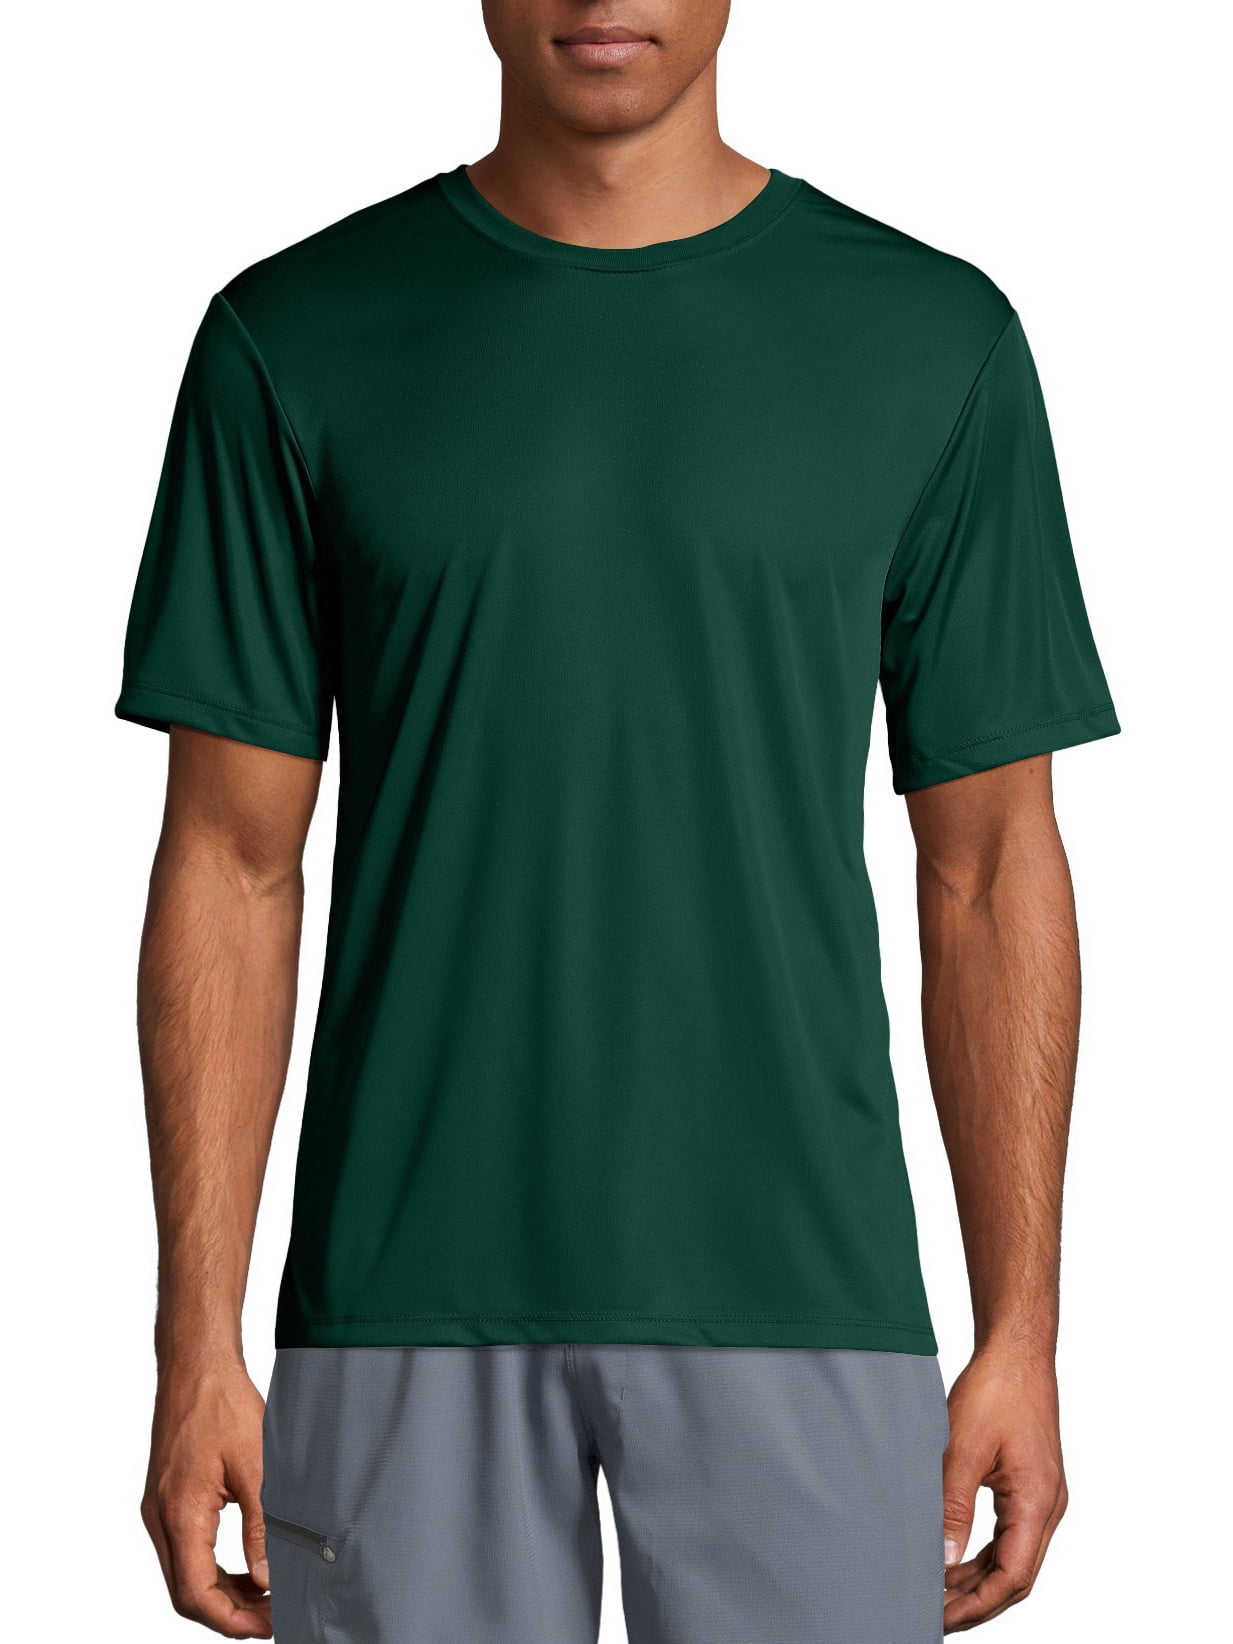 Details about   Hanes Cool Dri Performance Short Sleeve T-Shirt UPF Rating 50 Moisture Wicking 